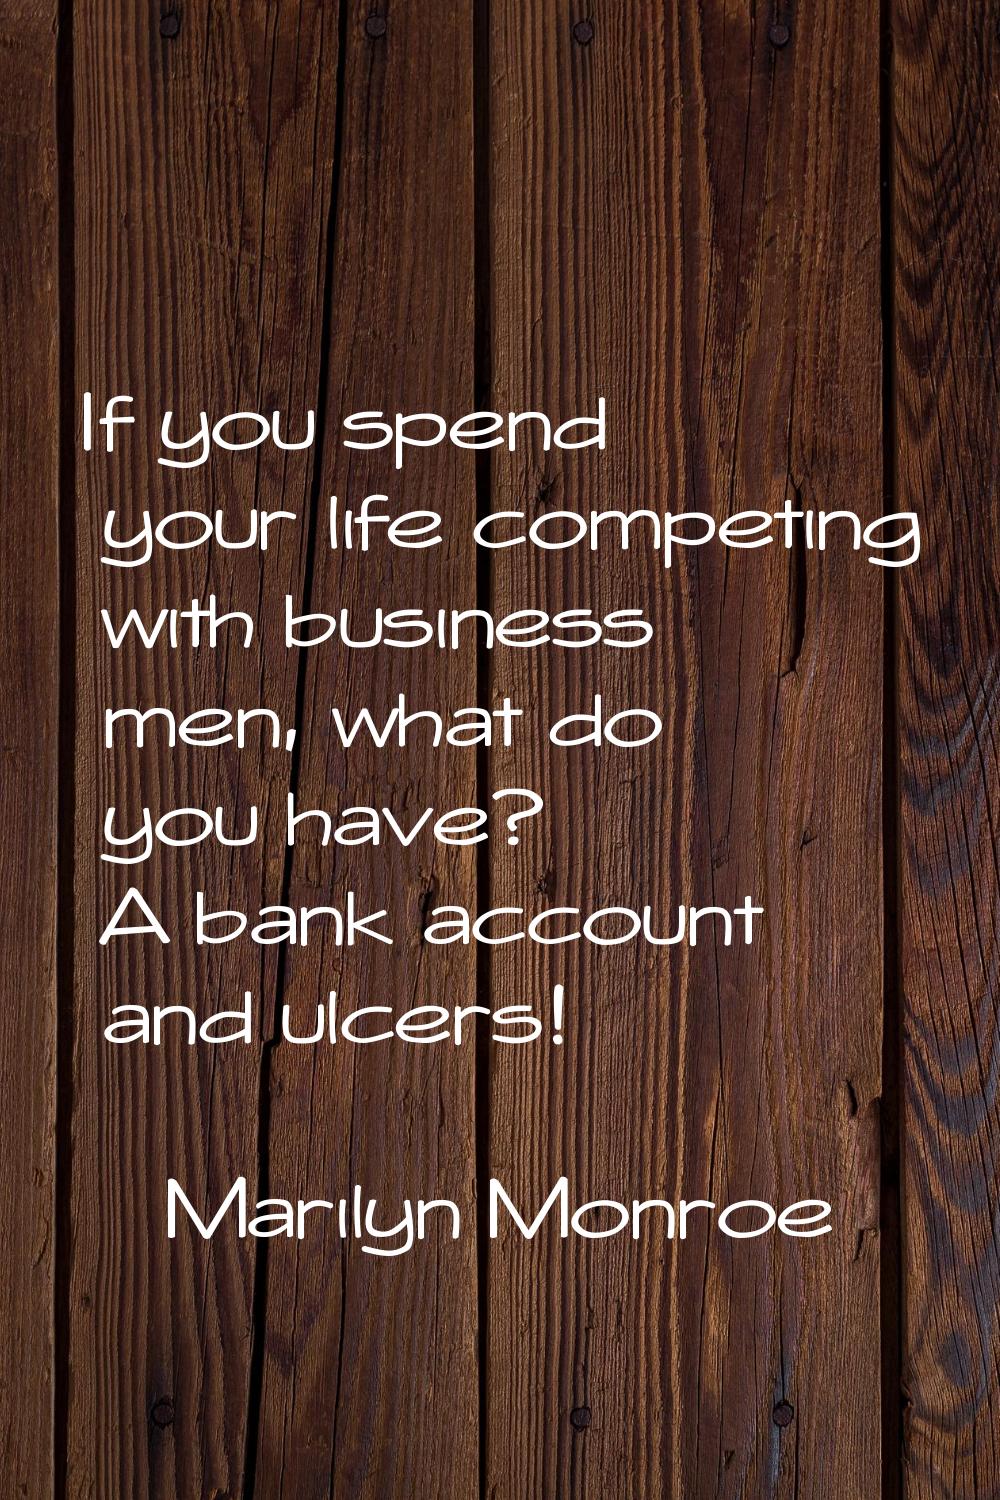 If you spend your life competing with business men, what do you have? A bank account and ulcers!